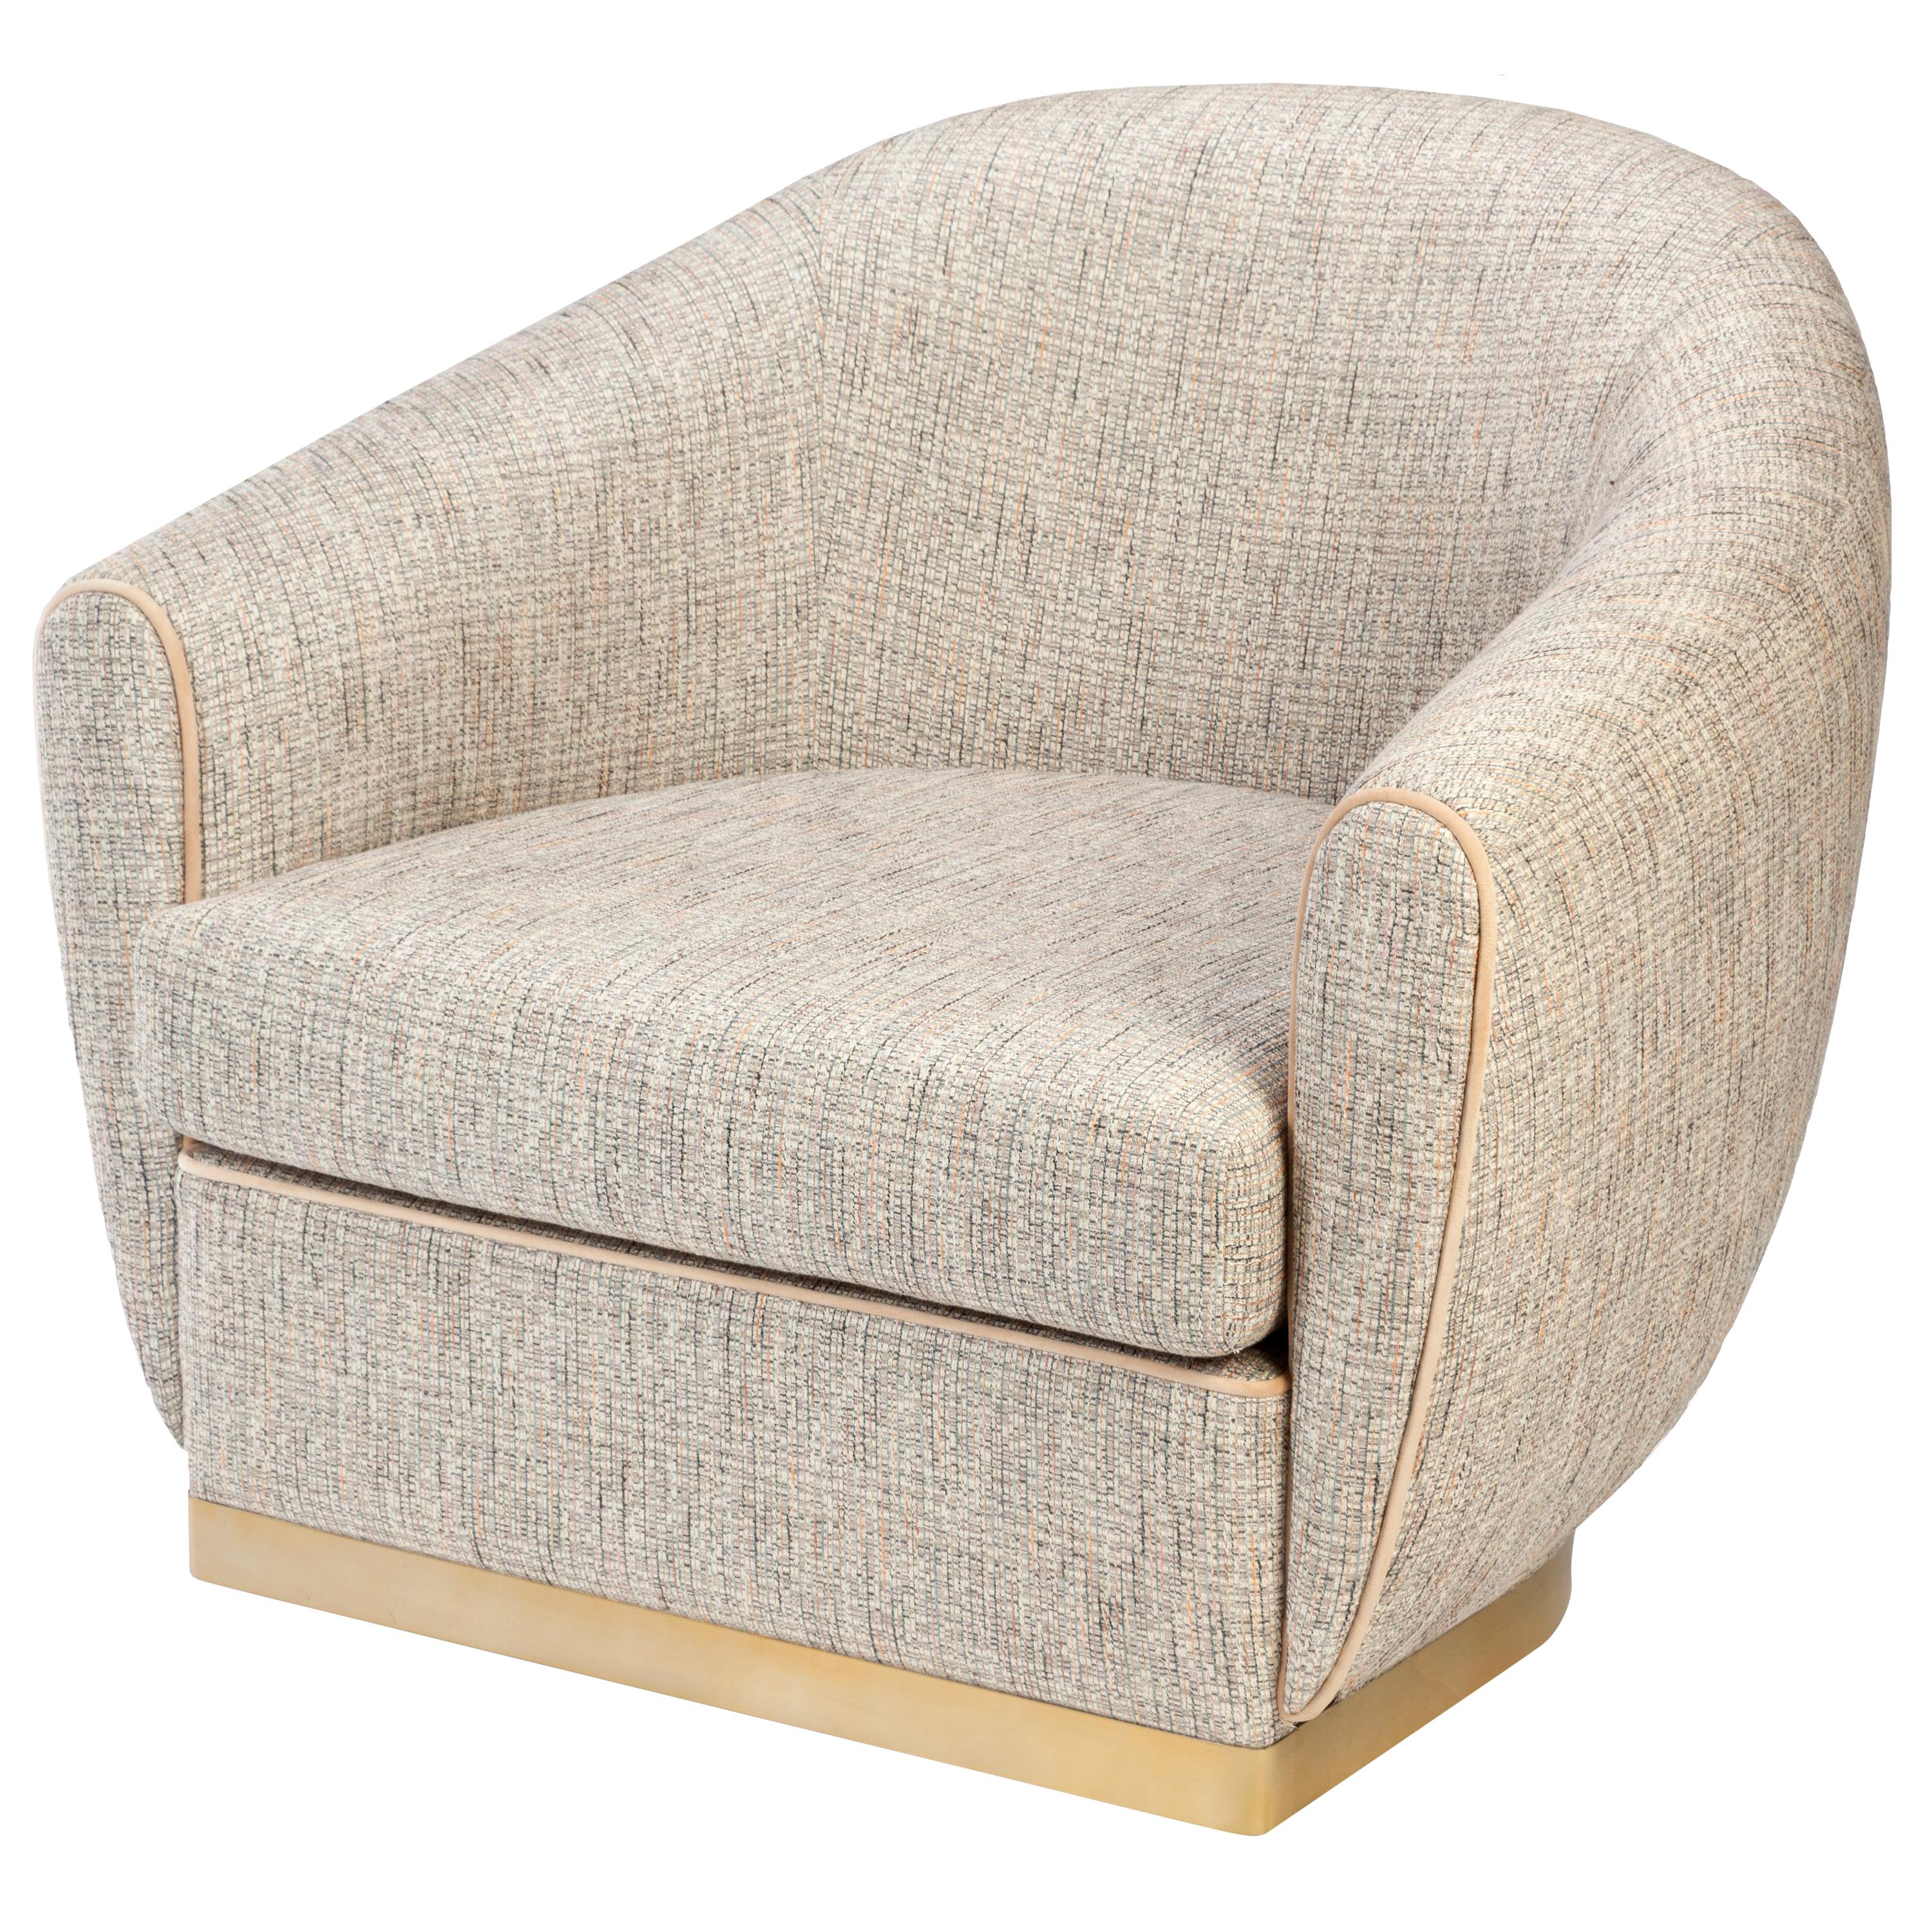 Stylish and elegant, Grace armchair is extremely comfortable in its perfect finishing’s. With its smooth edges, Grace has definitely a familiar retro feeling. A perfect combination of highly comfortable and perfectly tailored upholstery with the